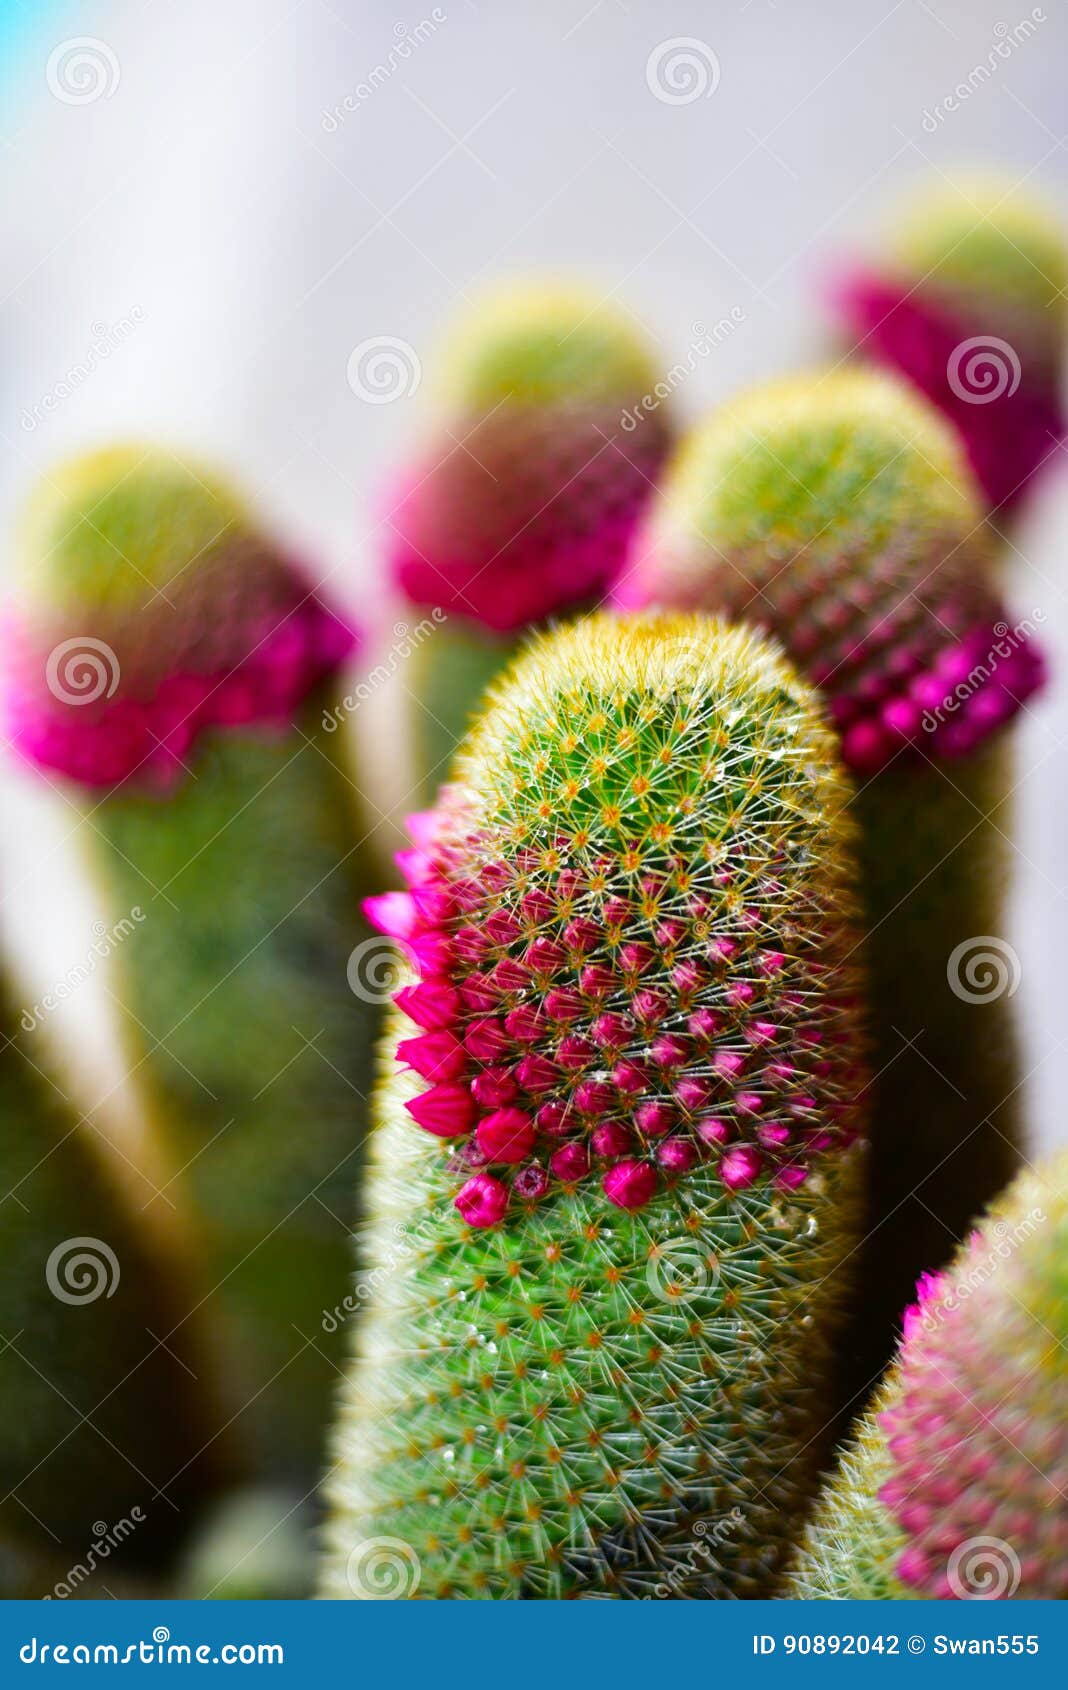  Blooming  cactus  in pot  stock photo Image of blossoming 